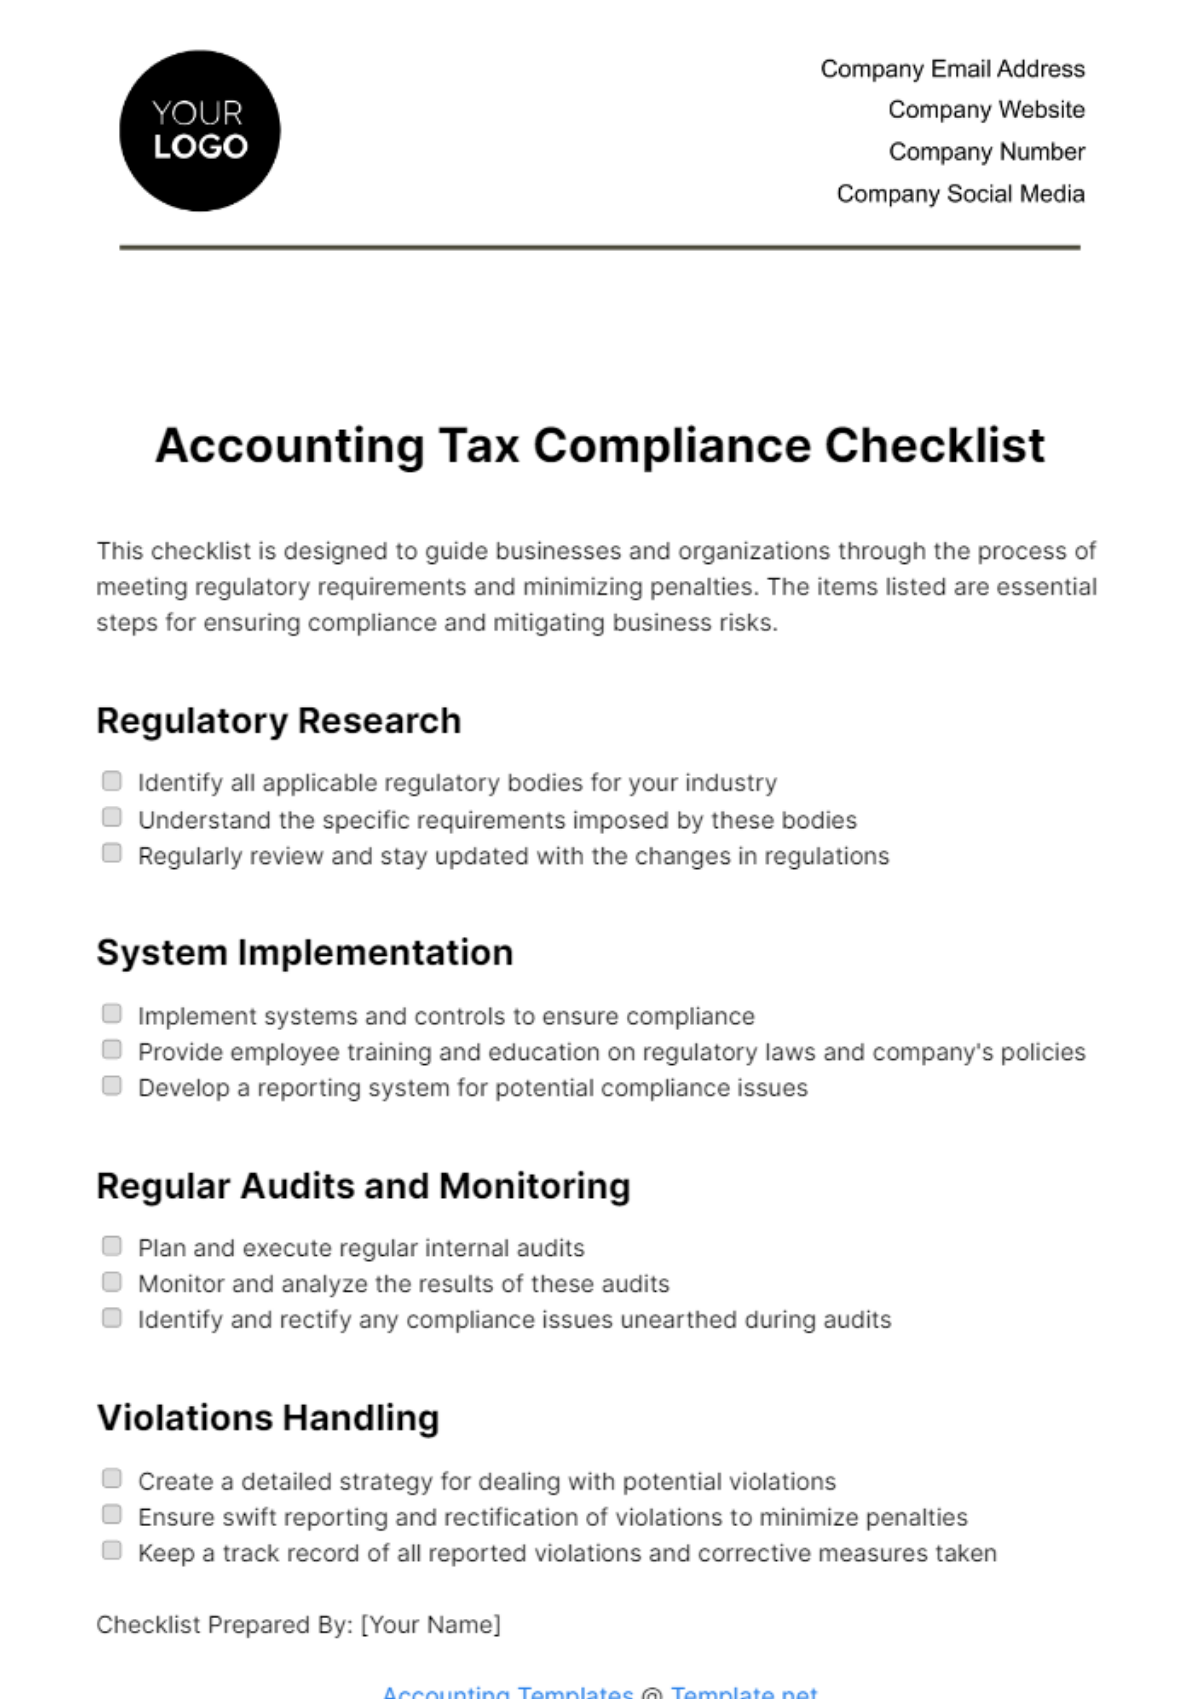 Free Accounting Tax Compliance Checklist Template